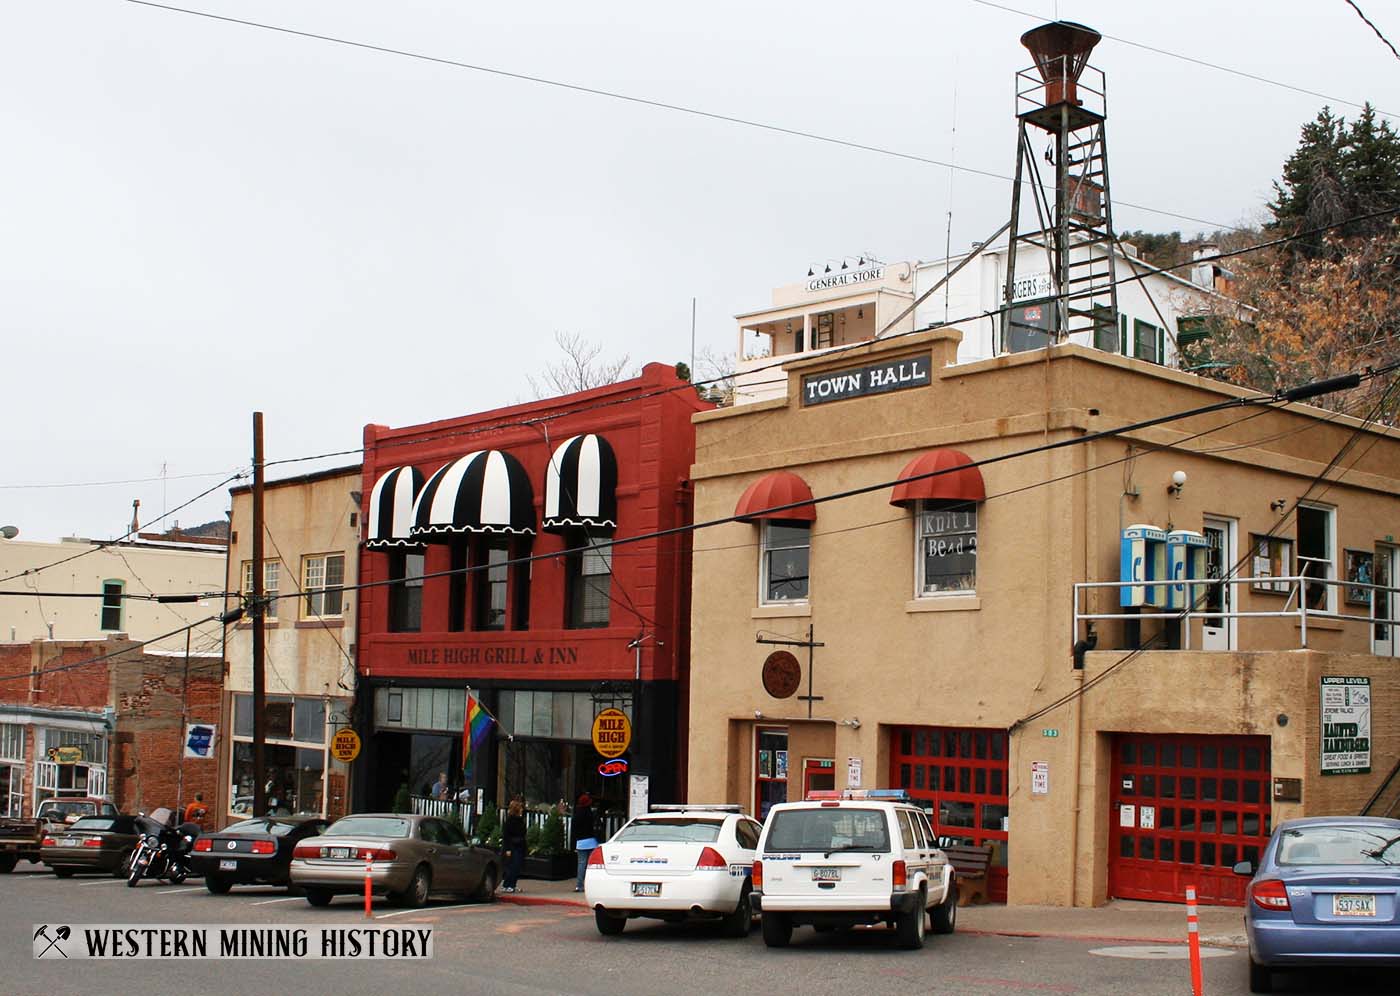 Historic Commercial Buildings - Jerome